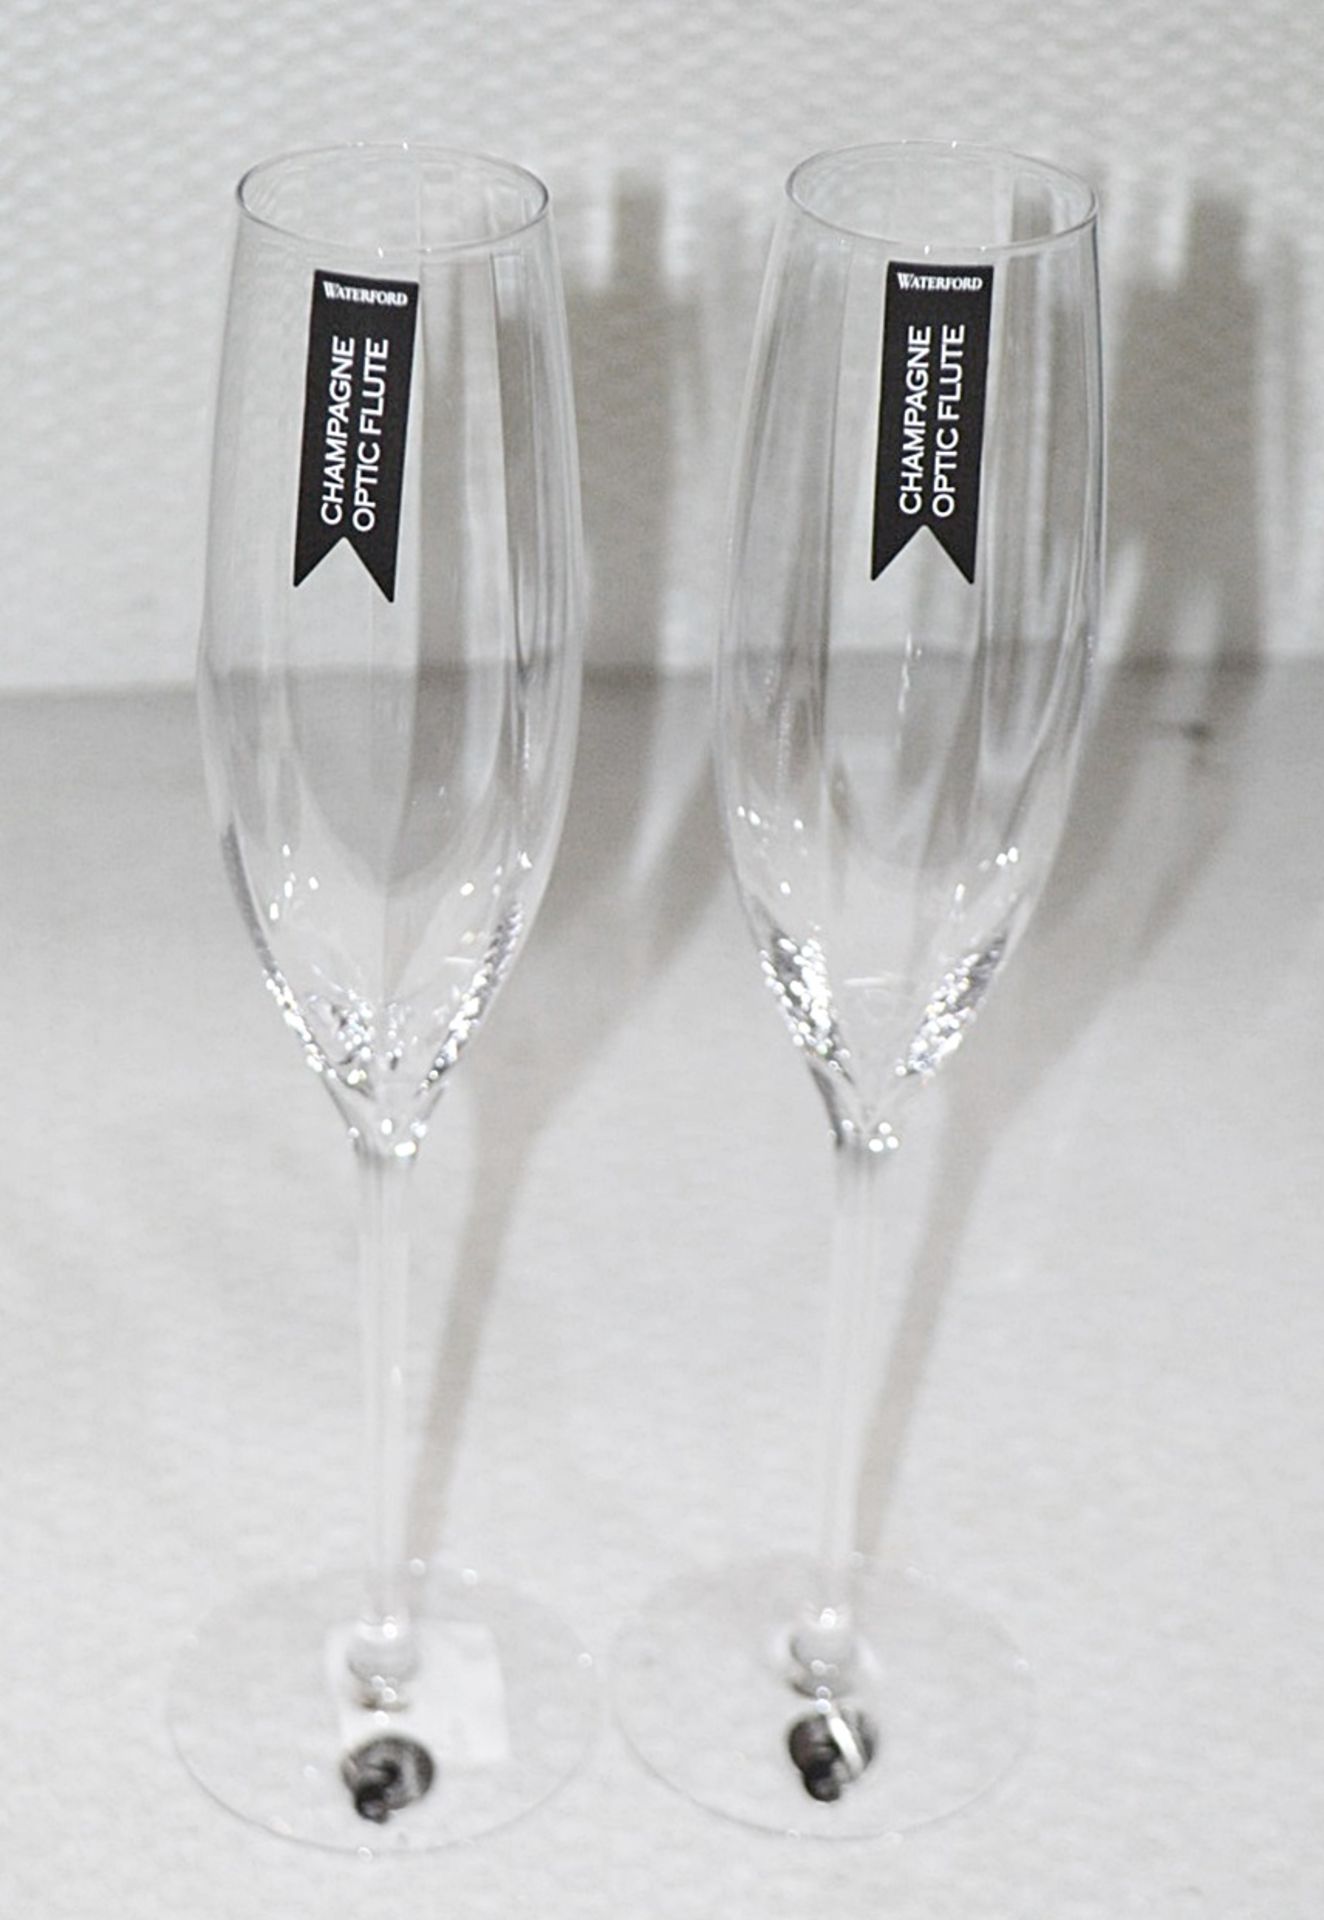 Set of 2 x WATERFORD CRYSTAL 'Elegance Optic' Champagne Flutes (300ml) - Height: 28cm - Unused Boxed - Image 2 of 8